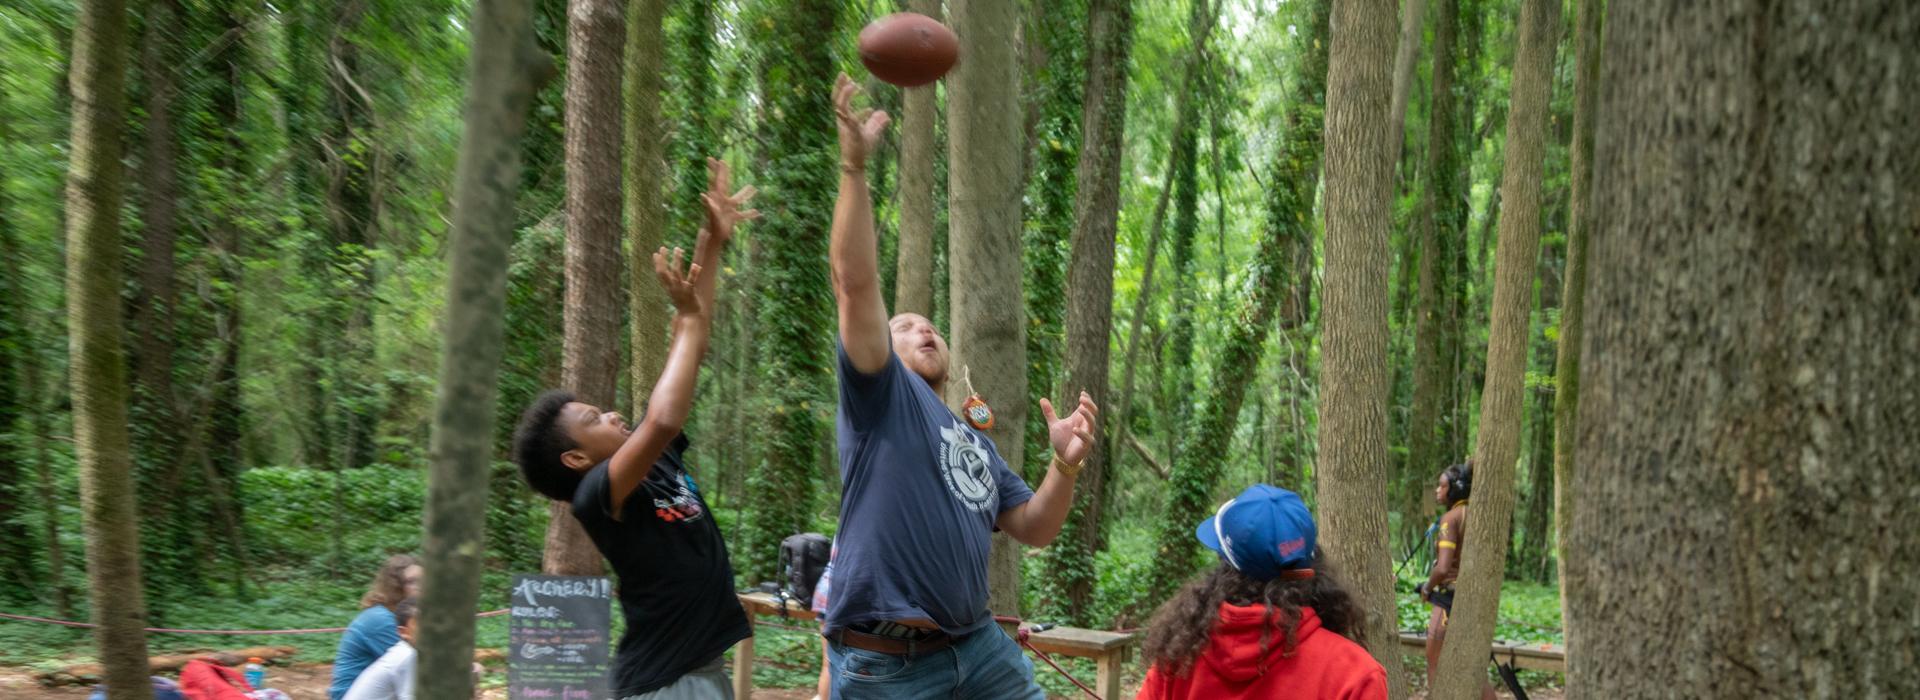 Camp donors play with a football at YMCA Camp Red Feather